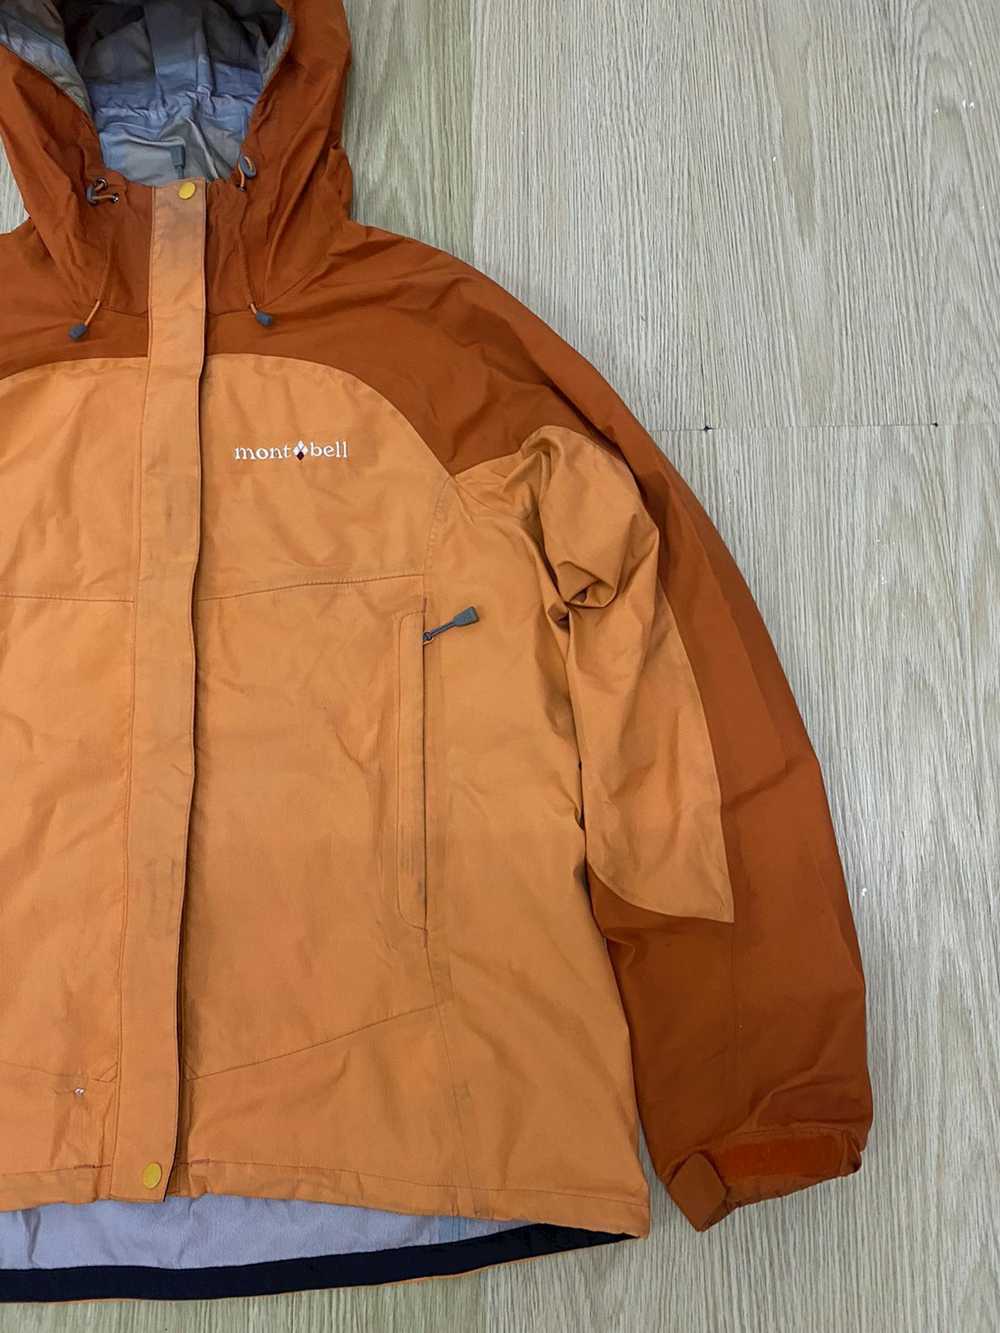 Montbell Montbell waterproof light jacket - image 3